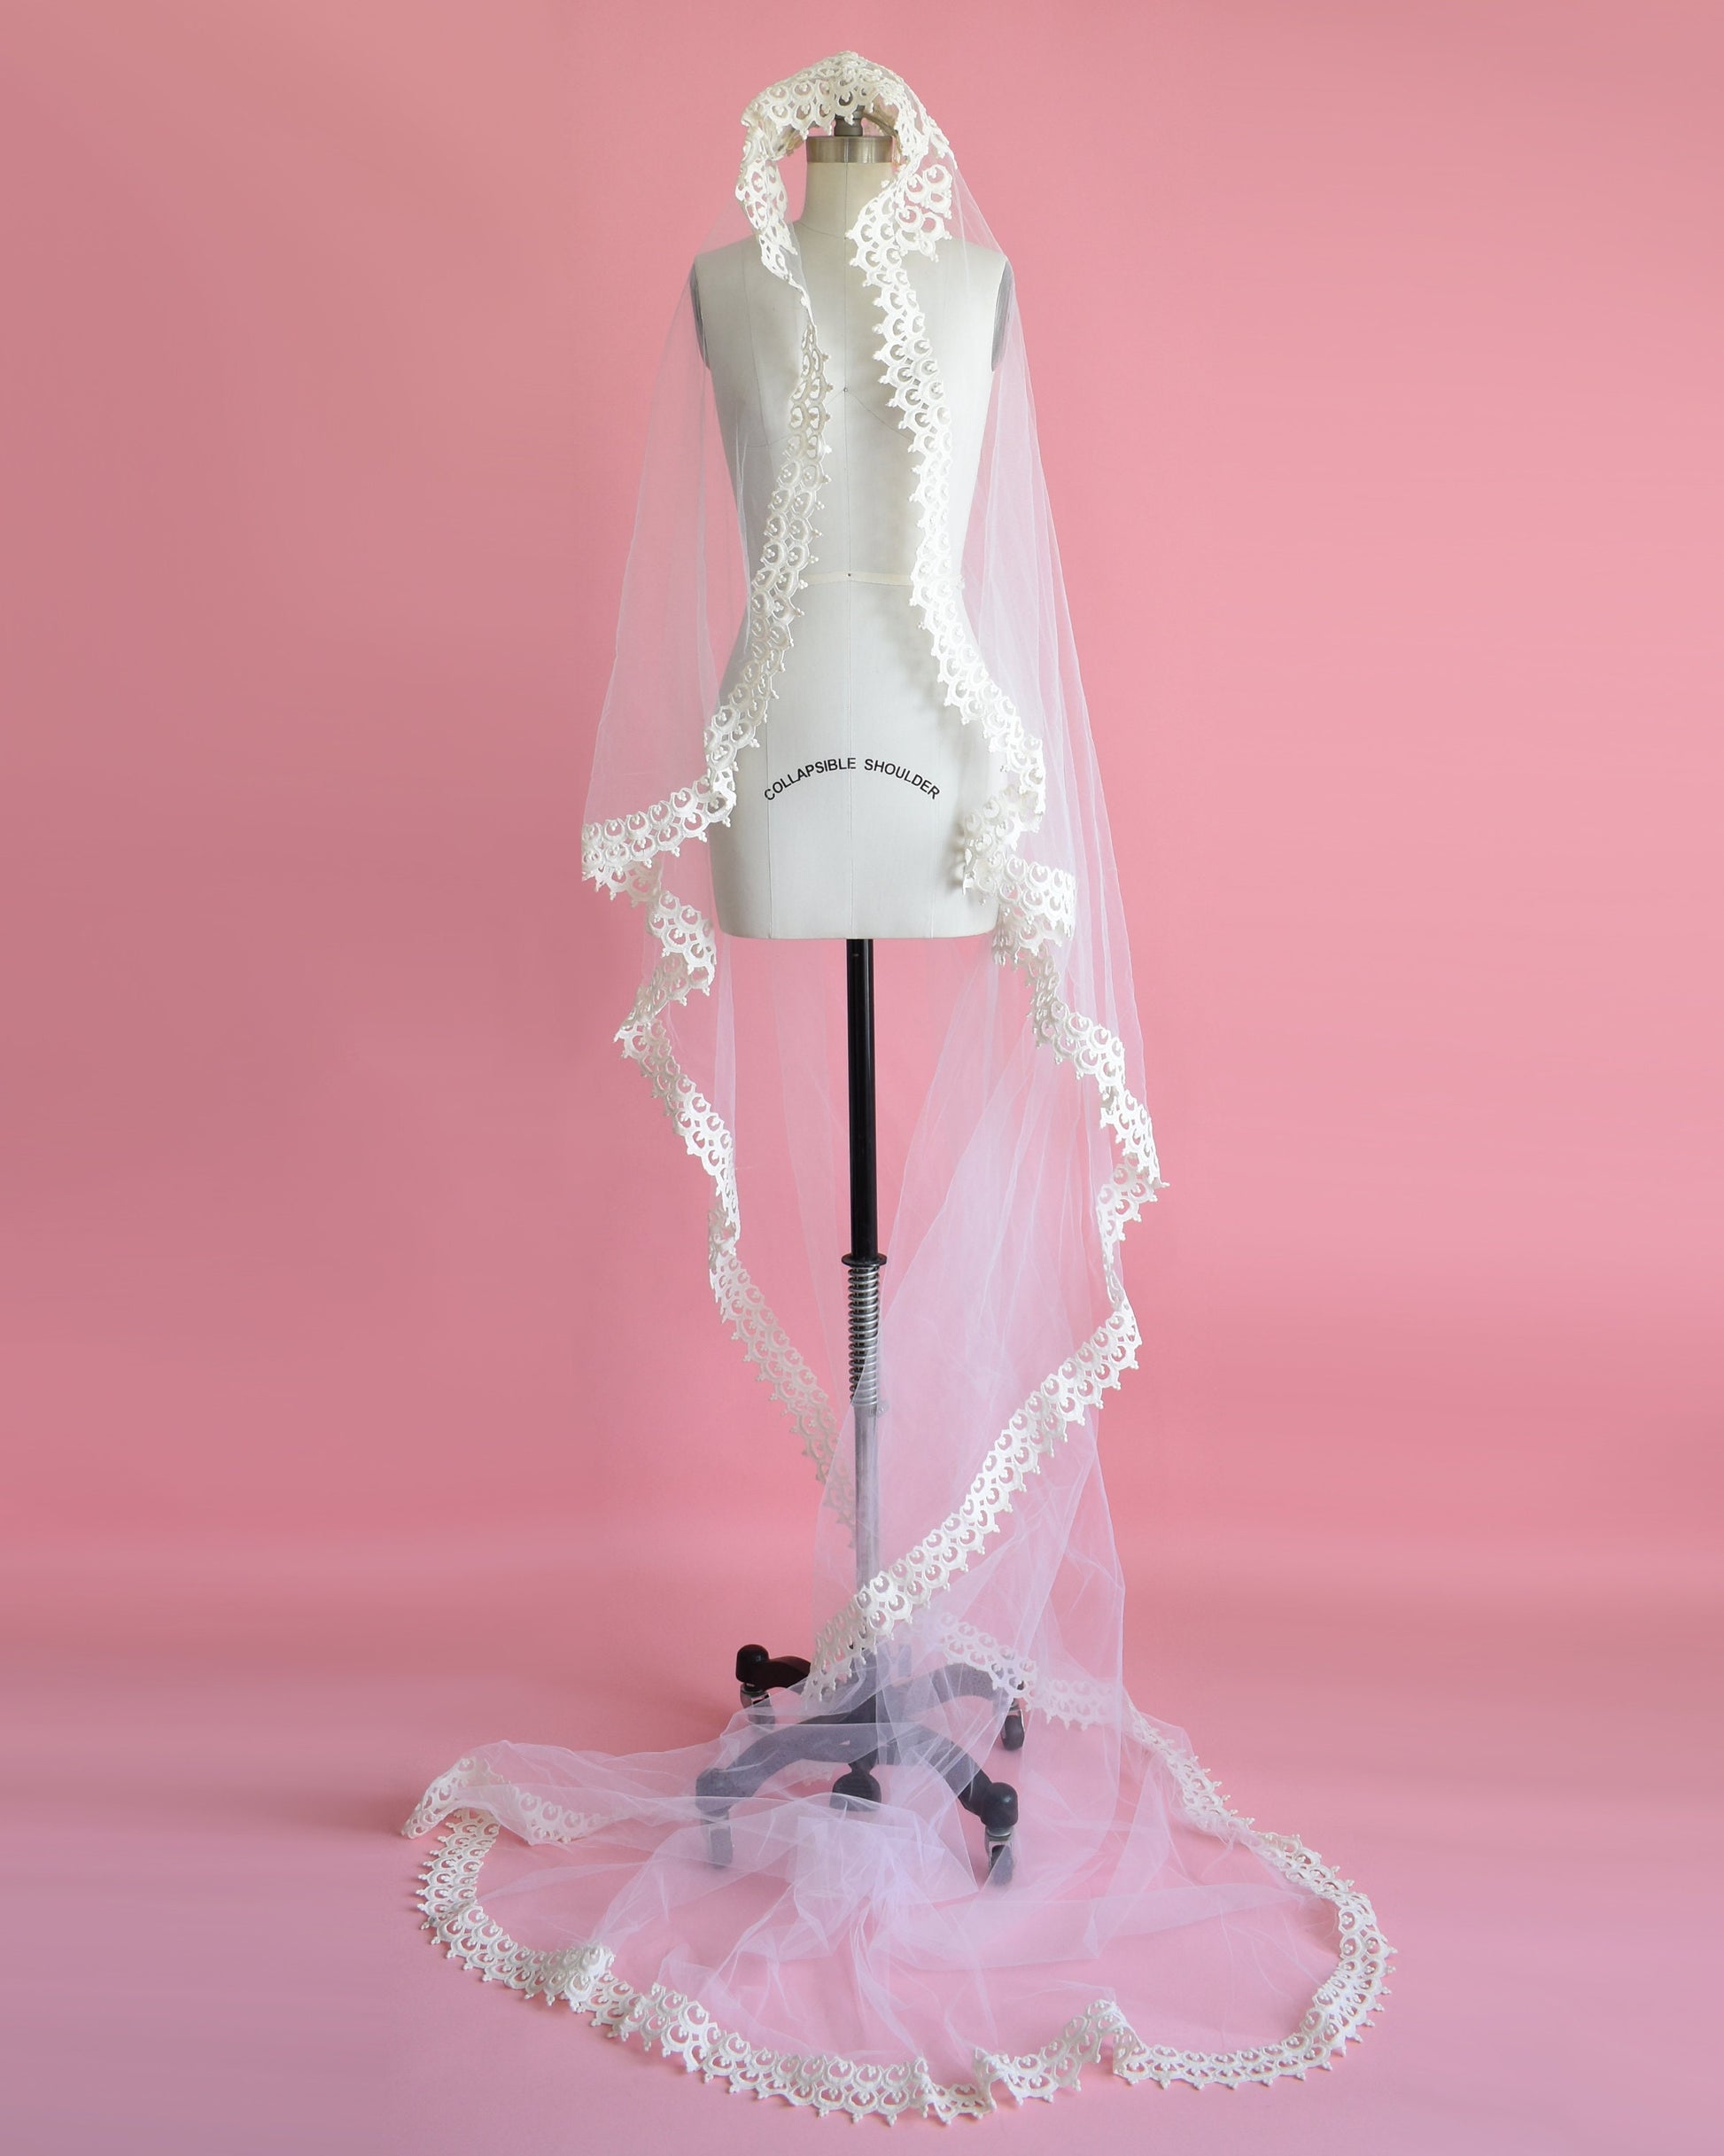 photo of the long wedding veil with matching lace trim on a dress form